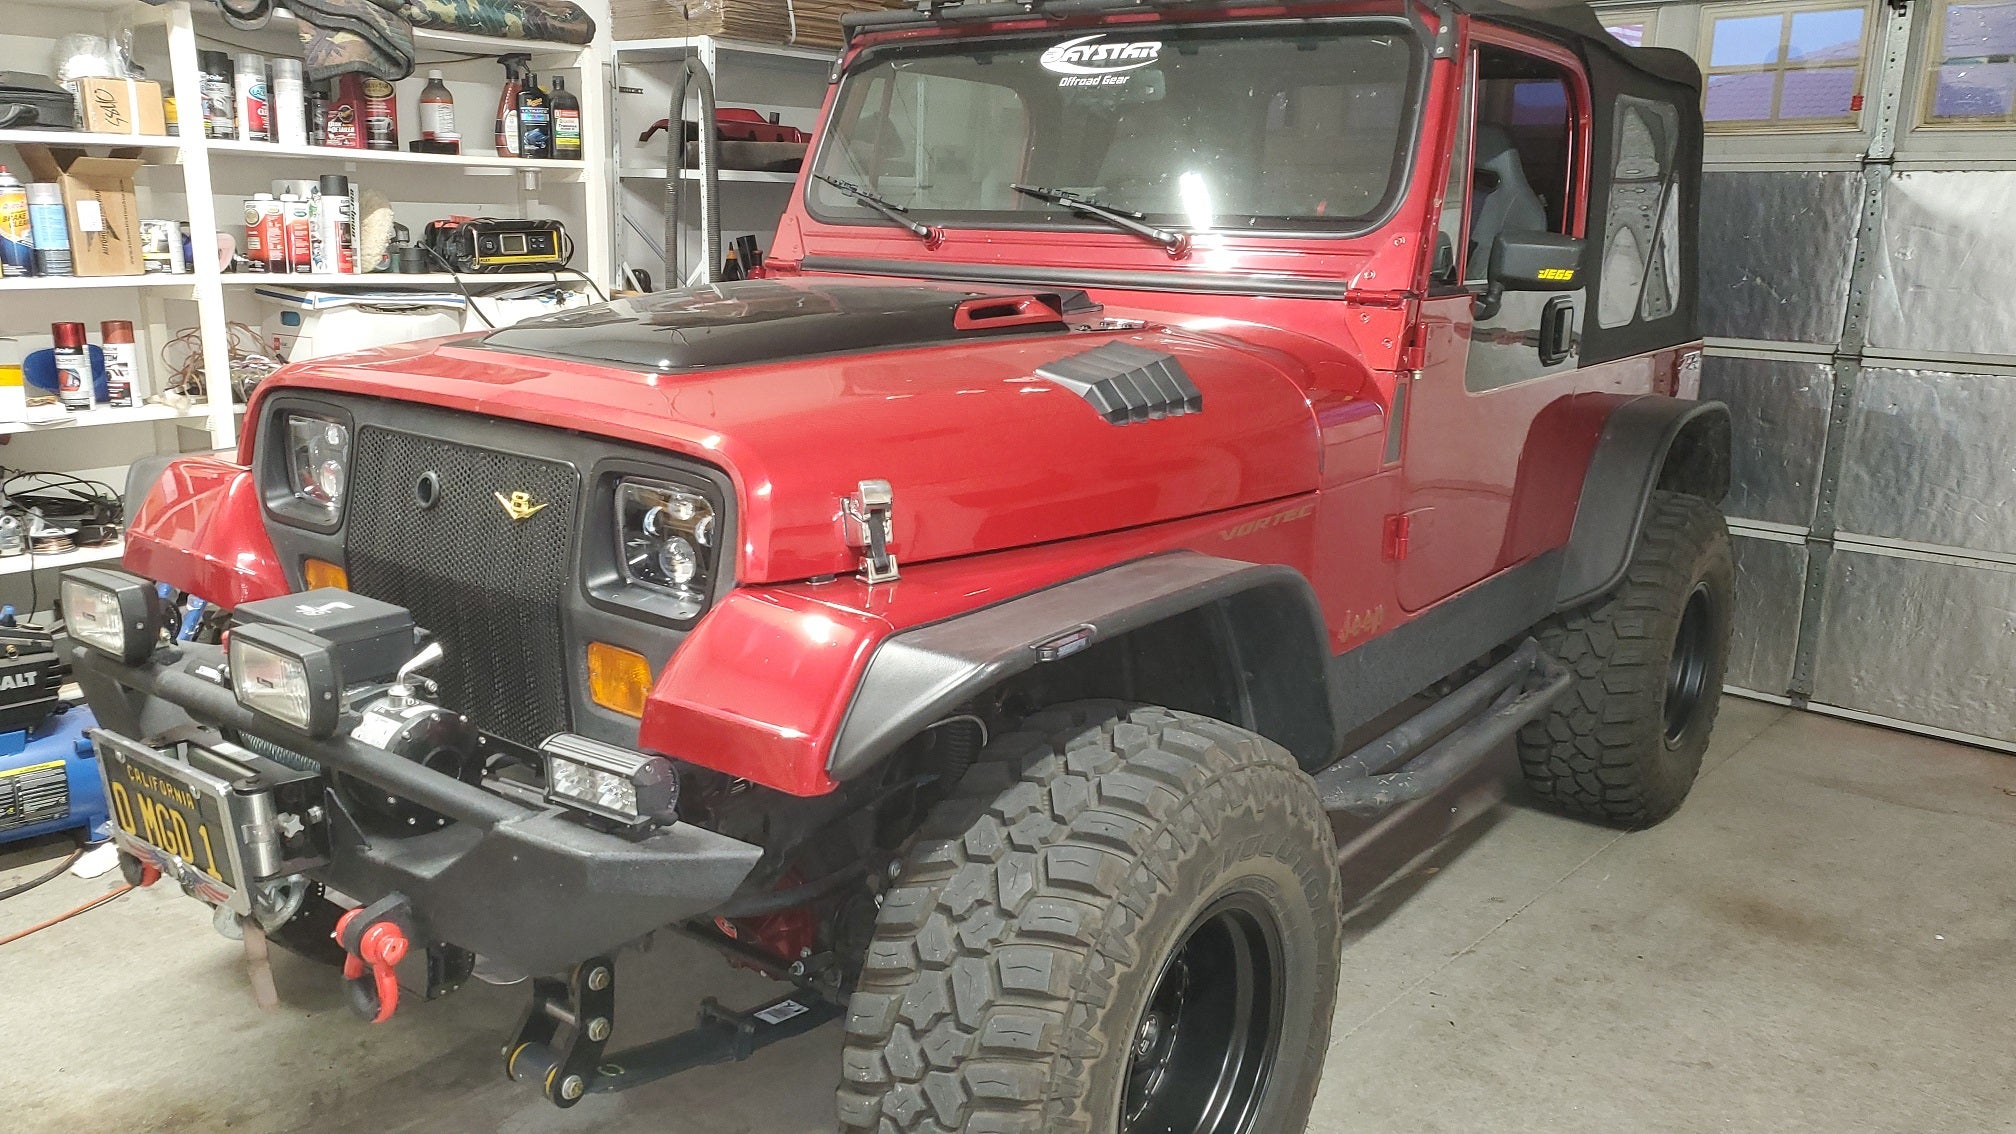 Best 91 Wrangler YJ Lift Kit to fit 33s and get a street driver soft ride | Jeep  Wrangler Forum